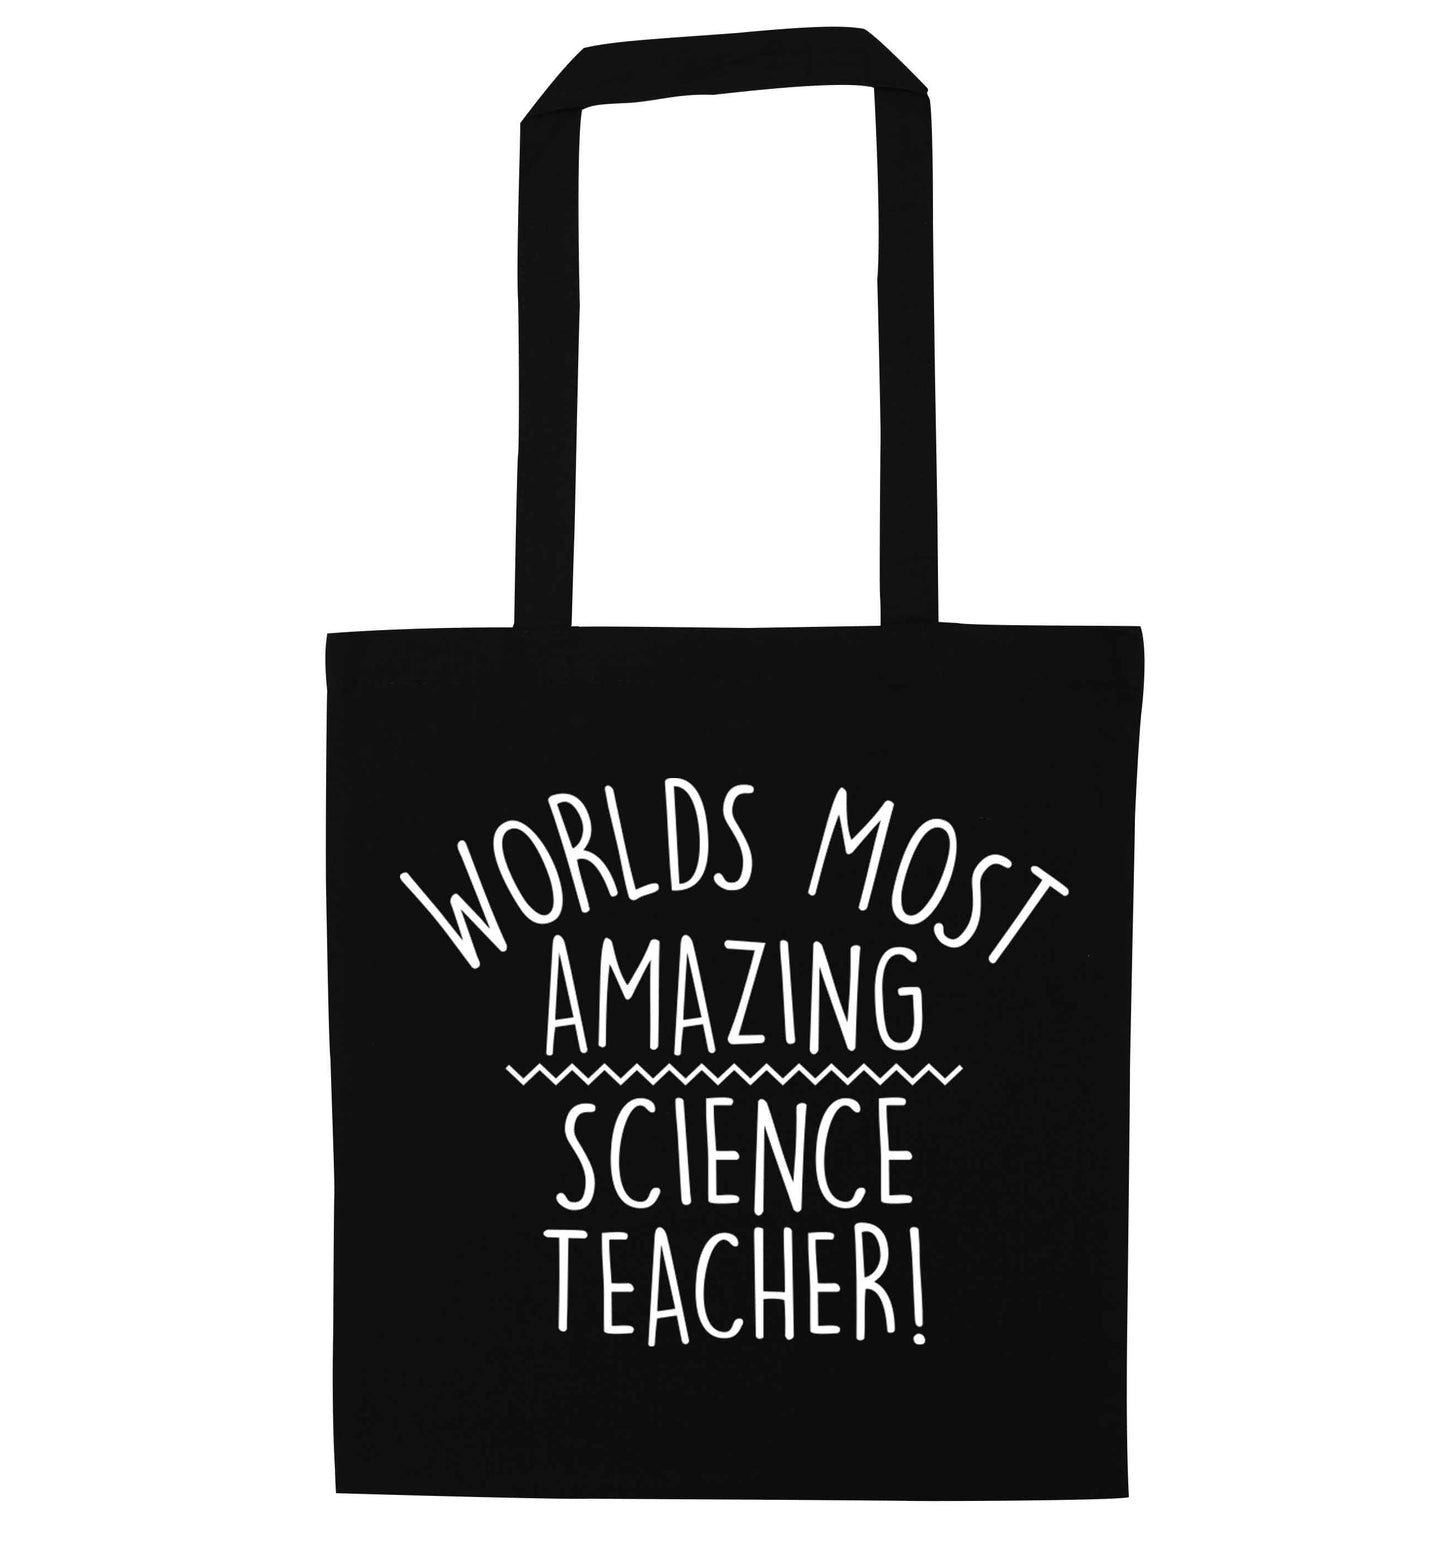 Worlds most amazing science teacher black tote bag